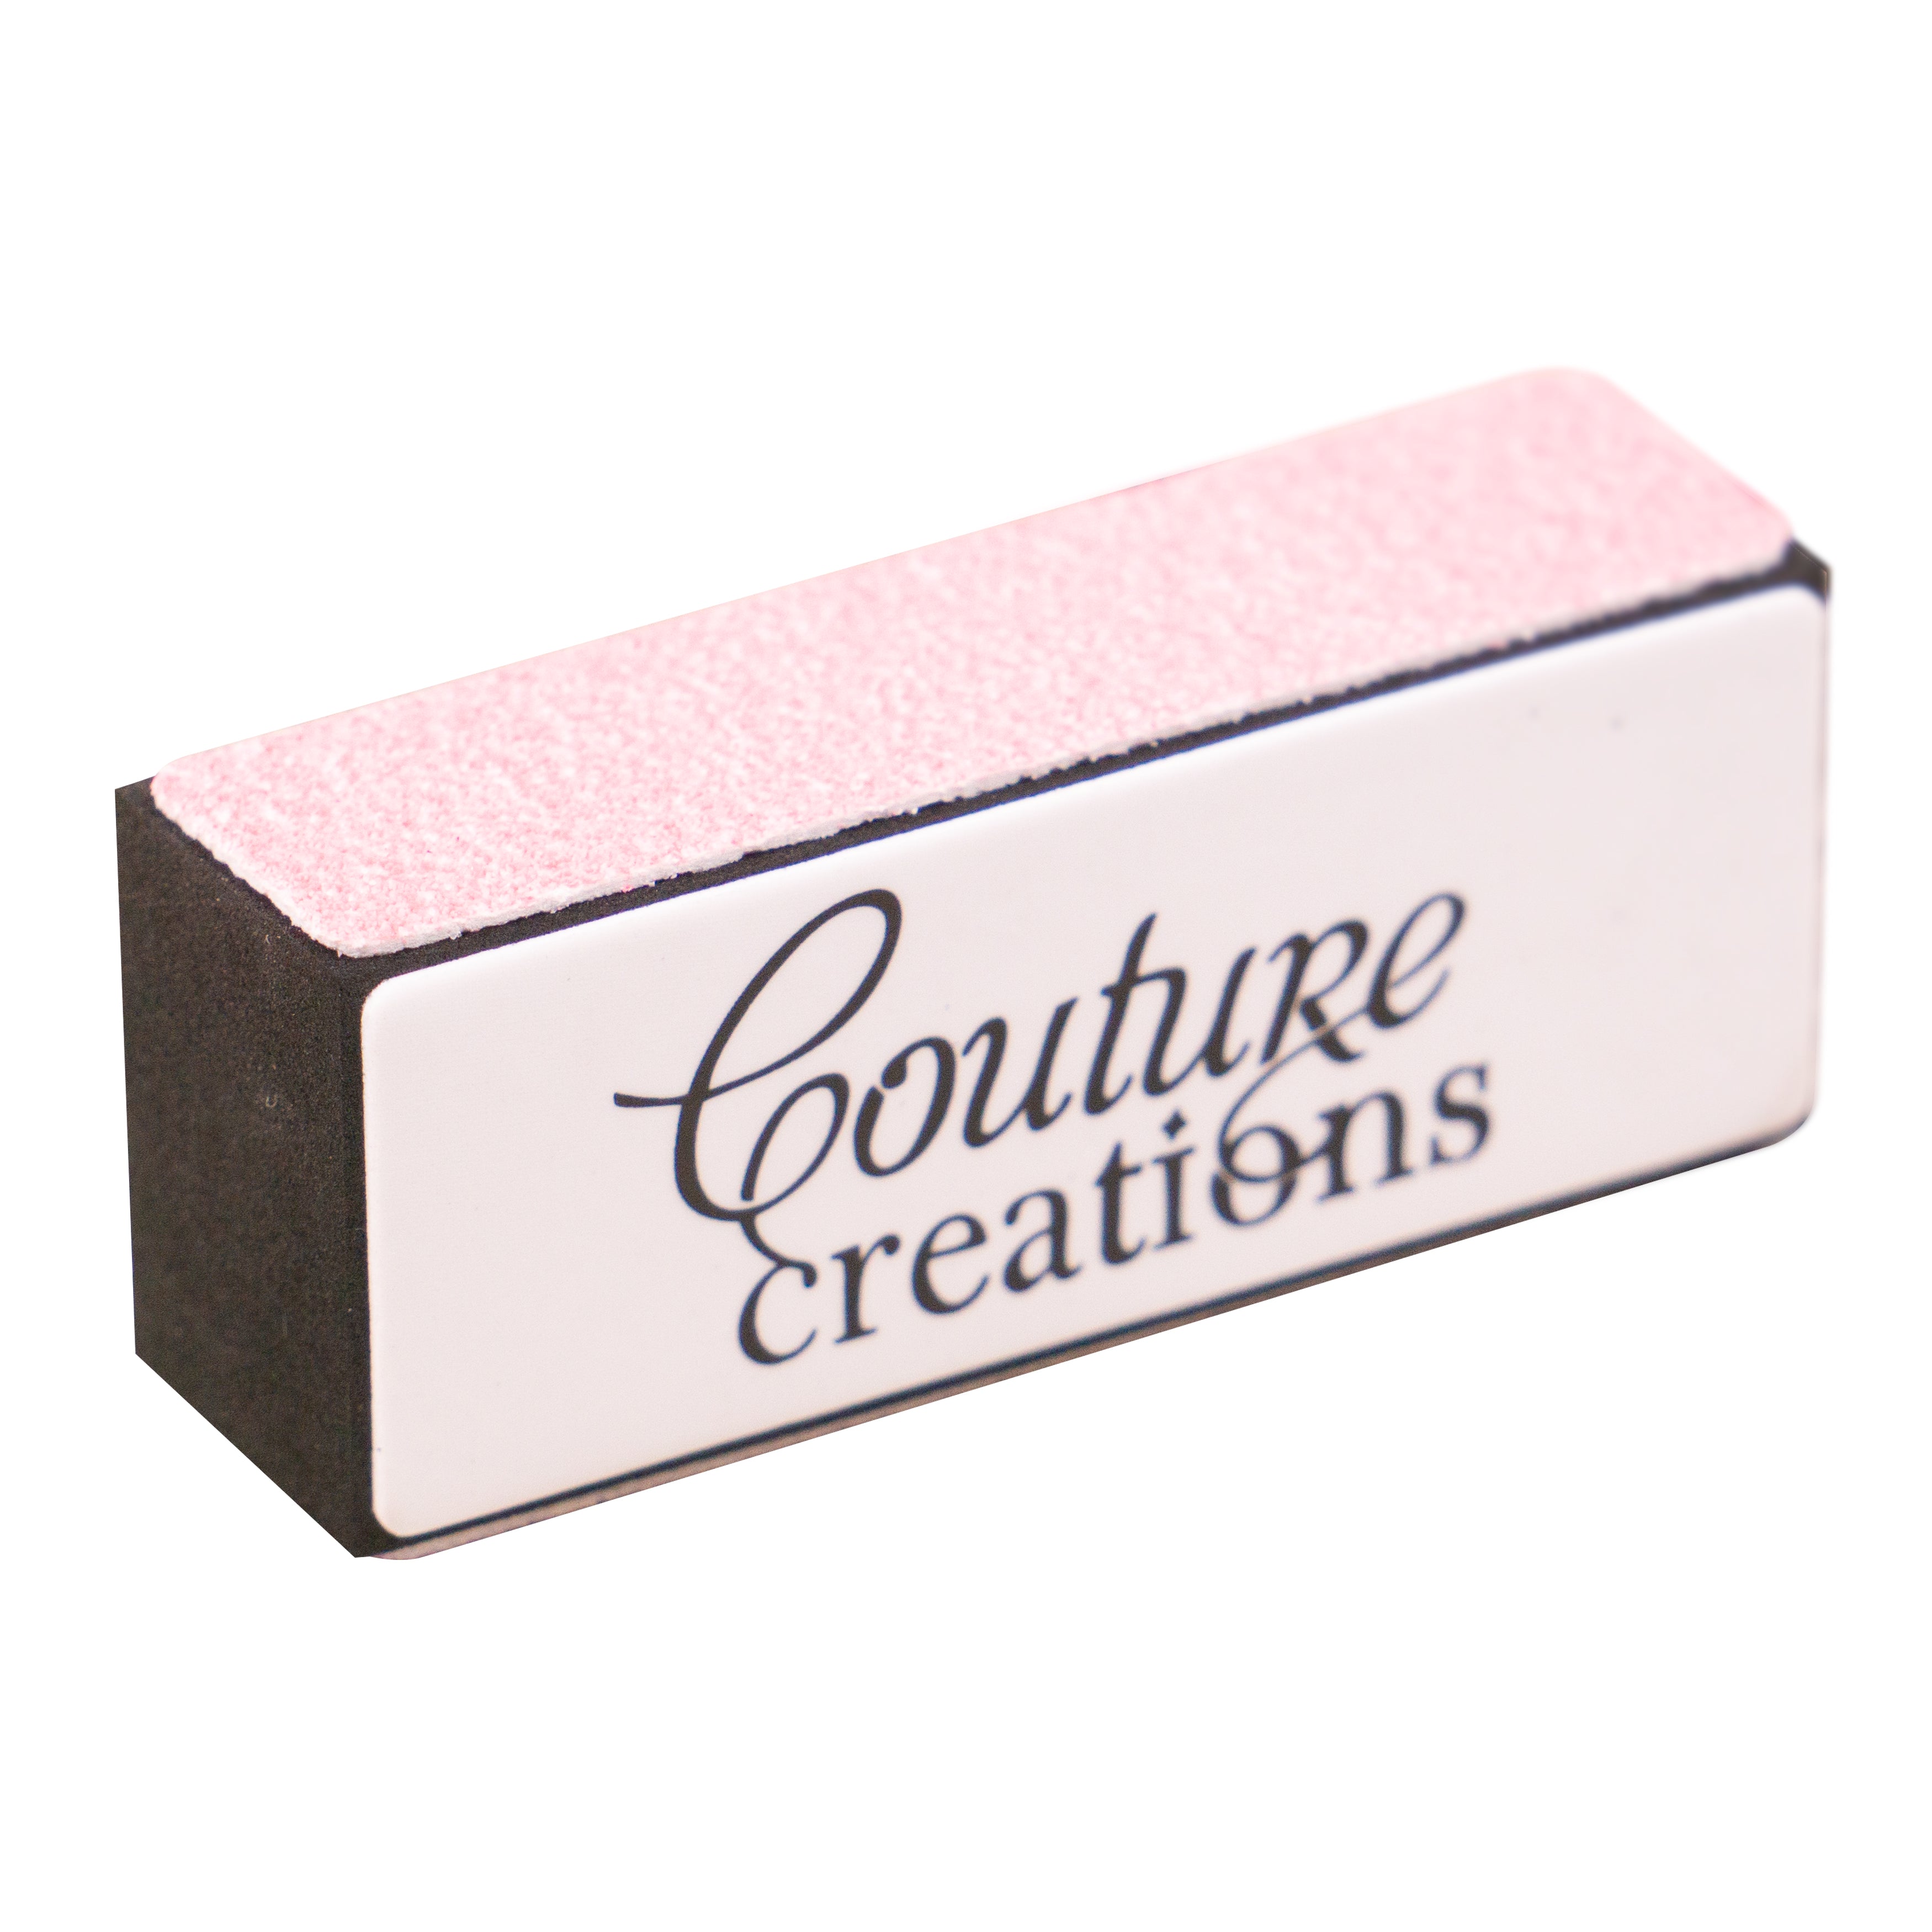 Couture Creations - Heat Tool for Crafting 723978